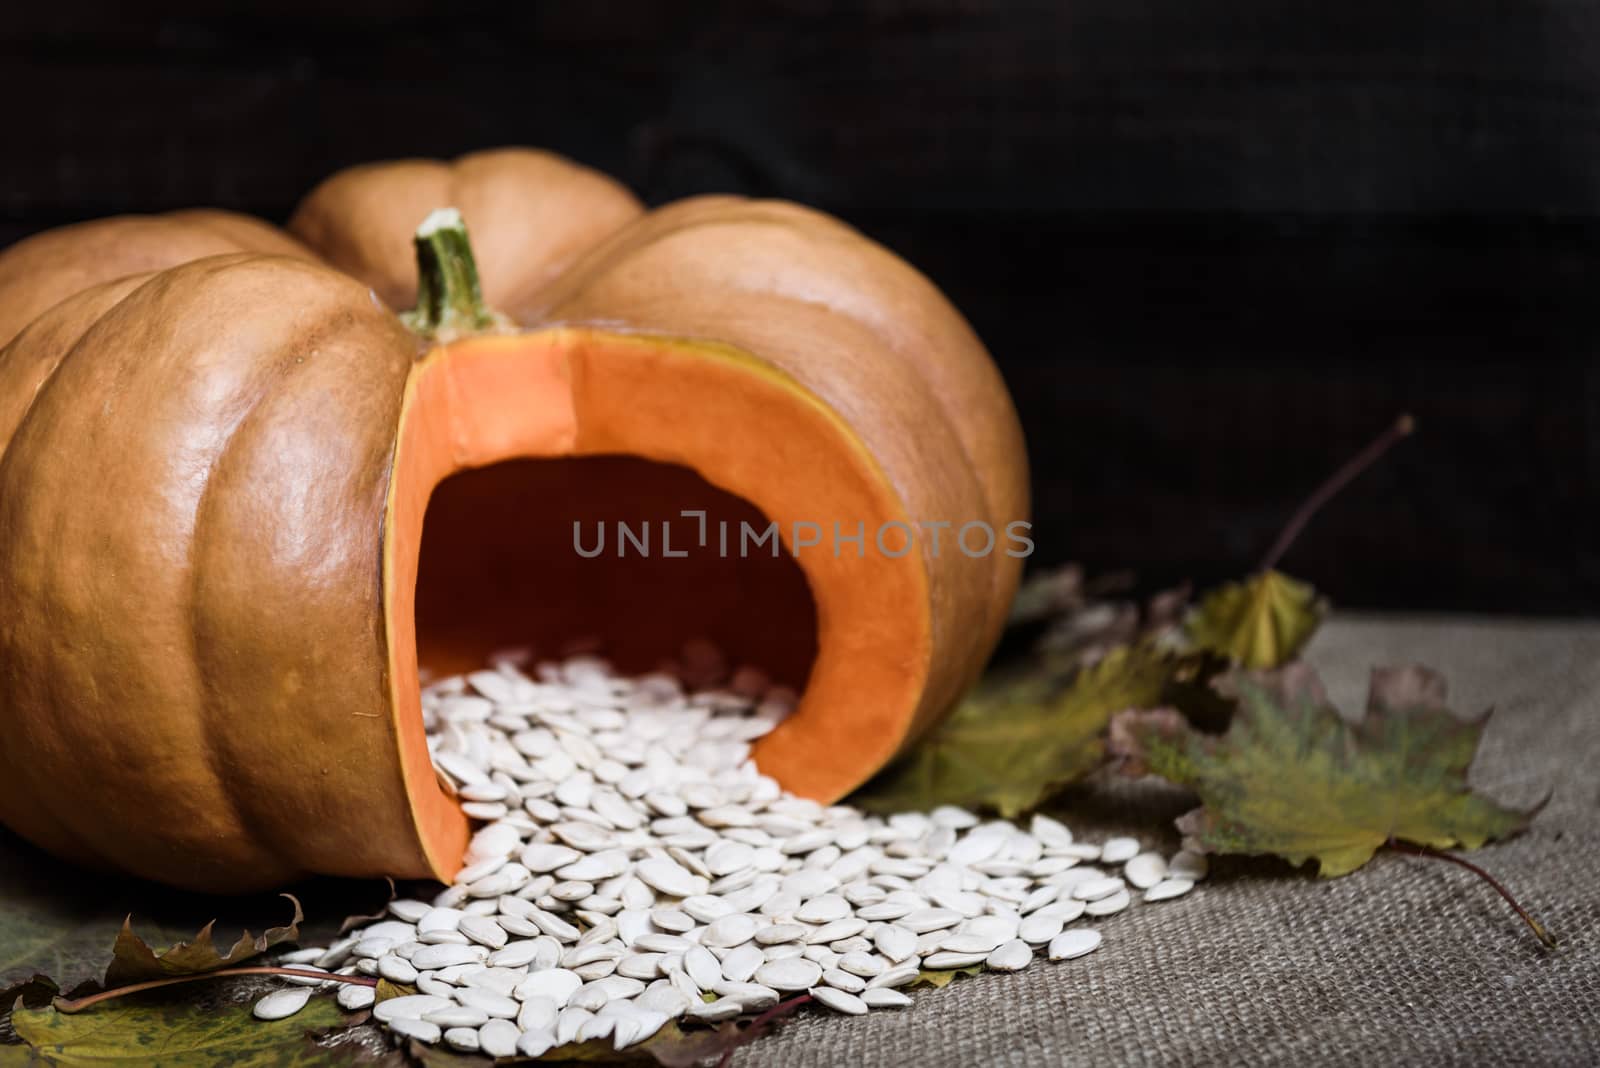 pumpkin lying on a wooden table with viburnum and seeds